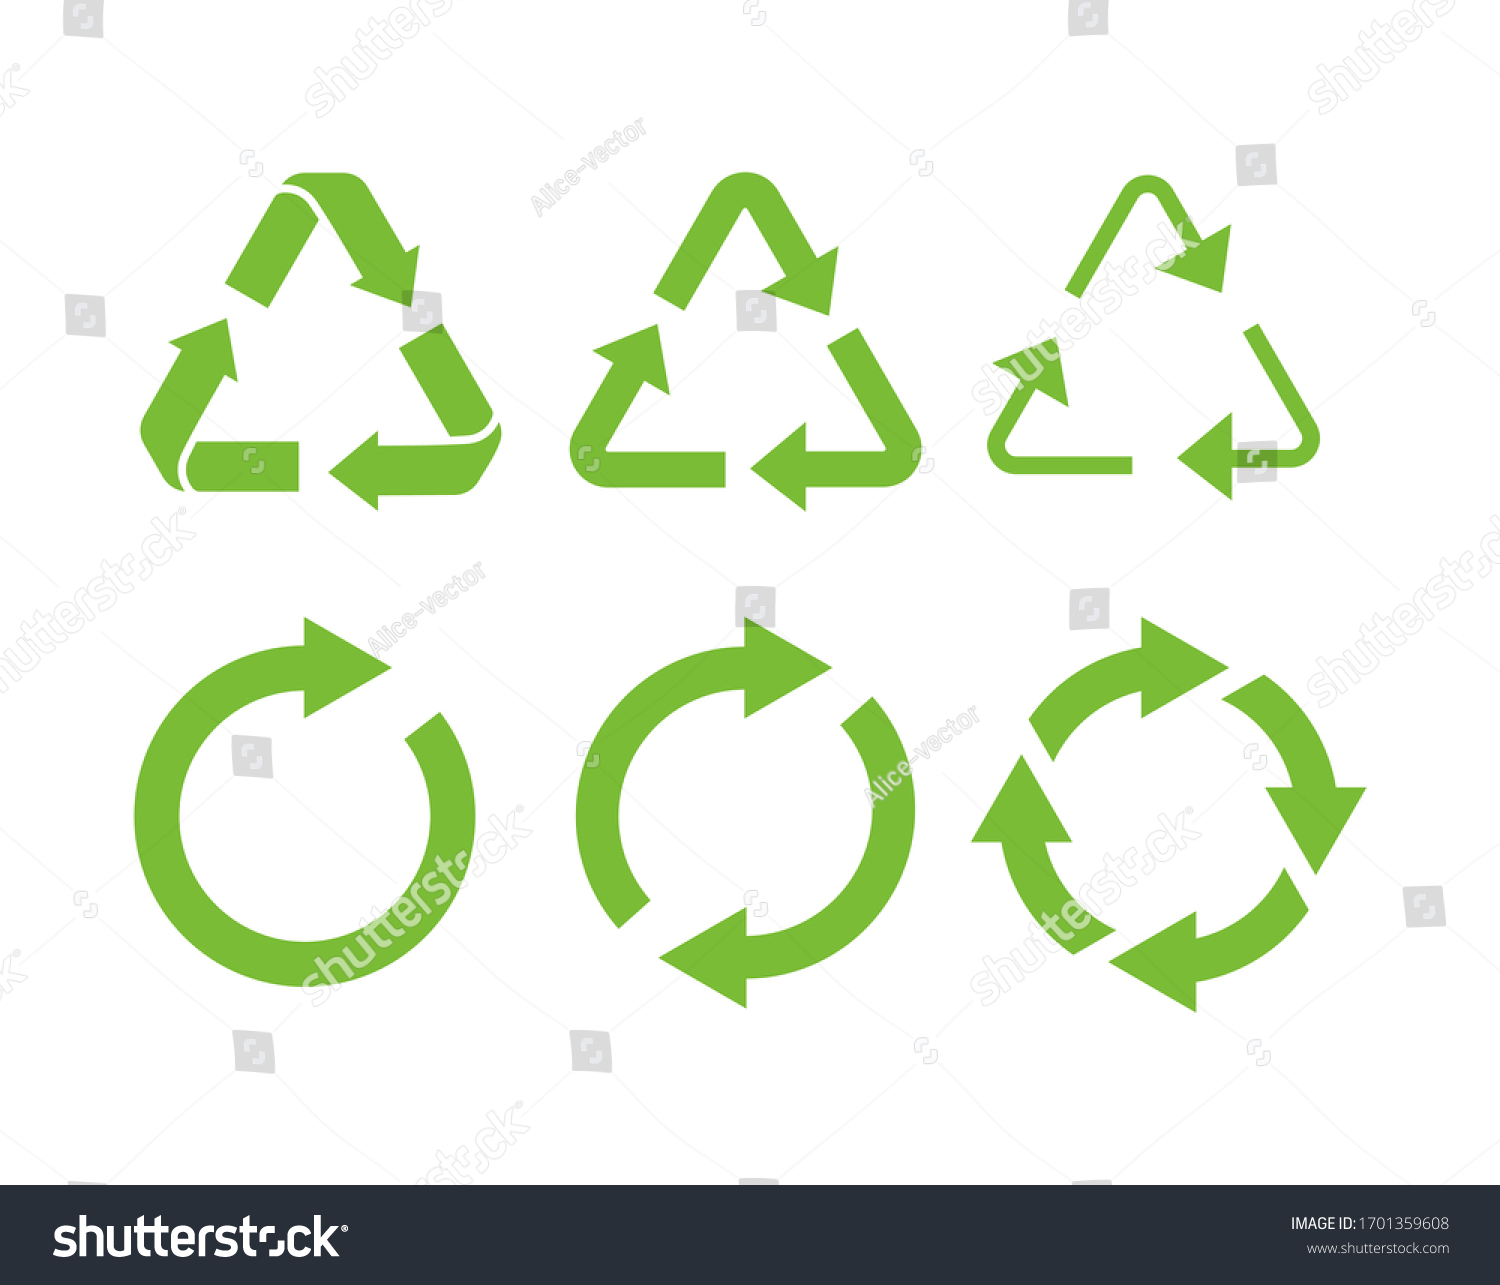 Recycle icon symbol vector. Recycling and rotation arrow icon #1701359608